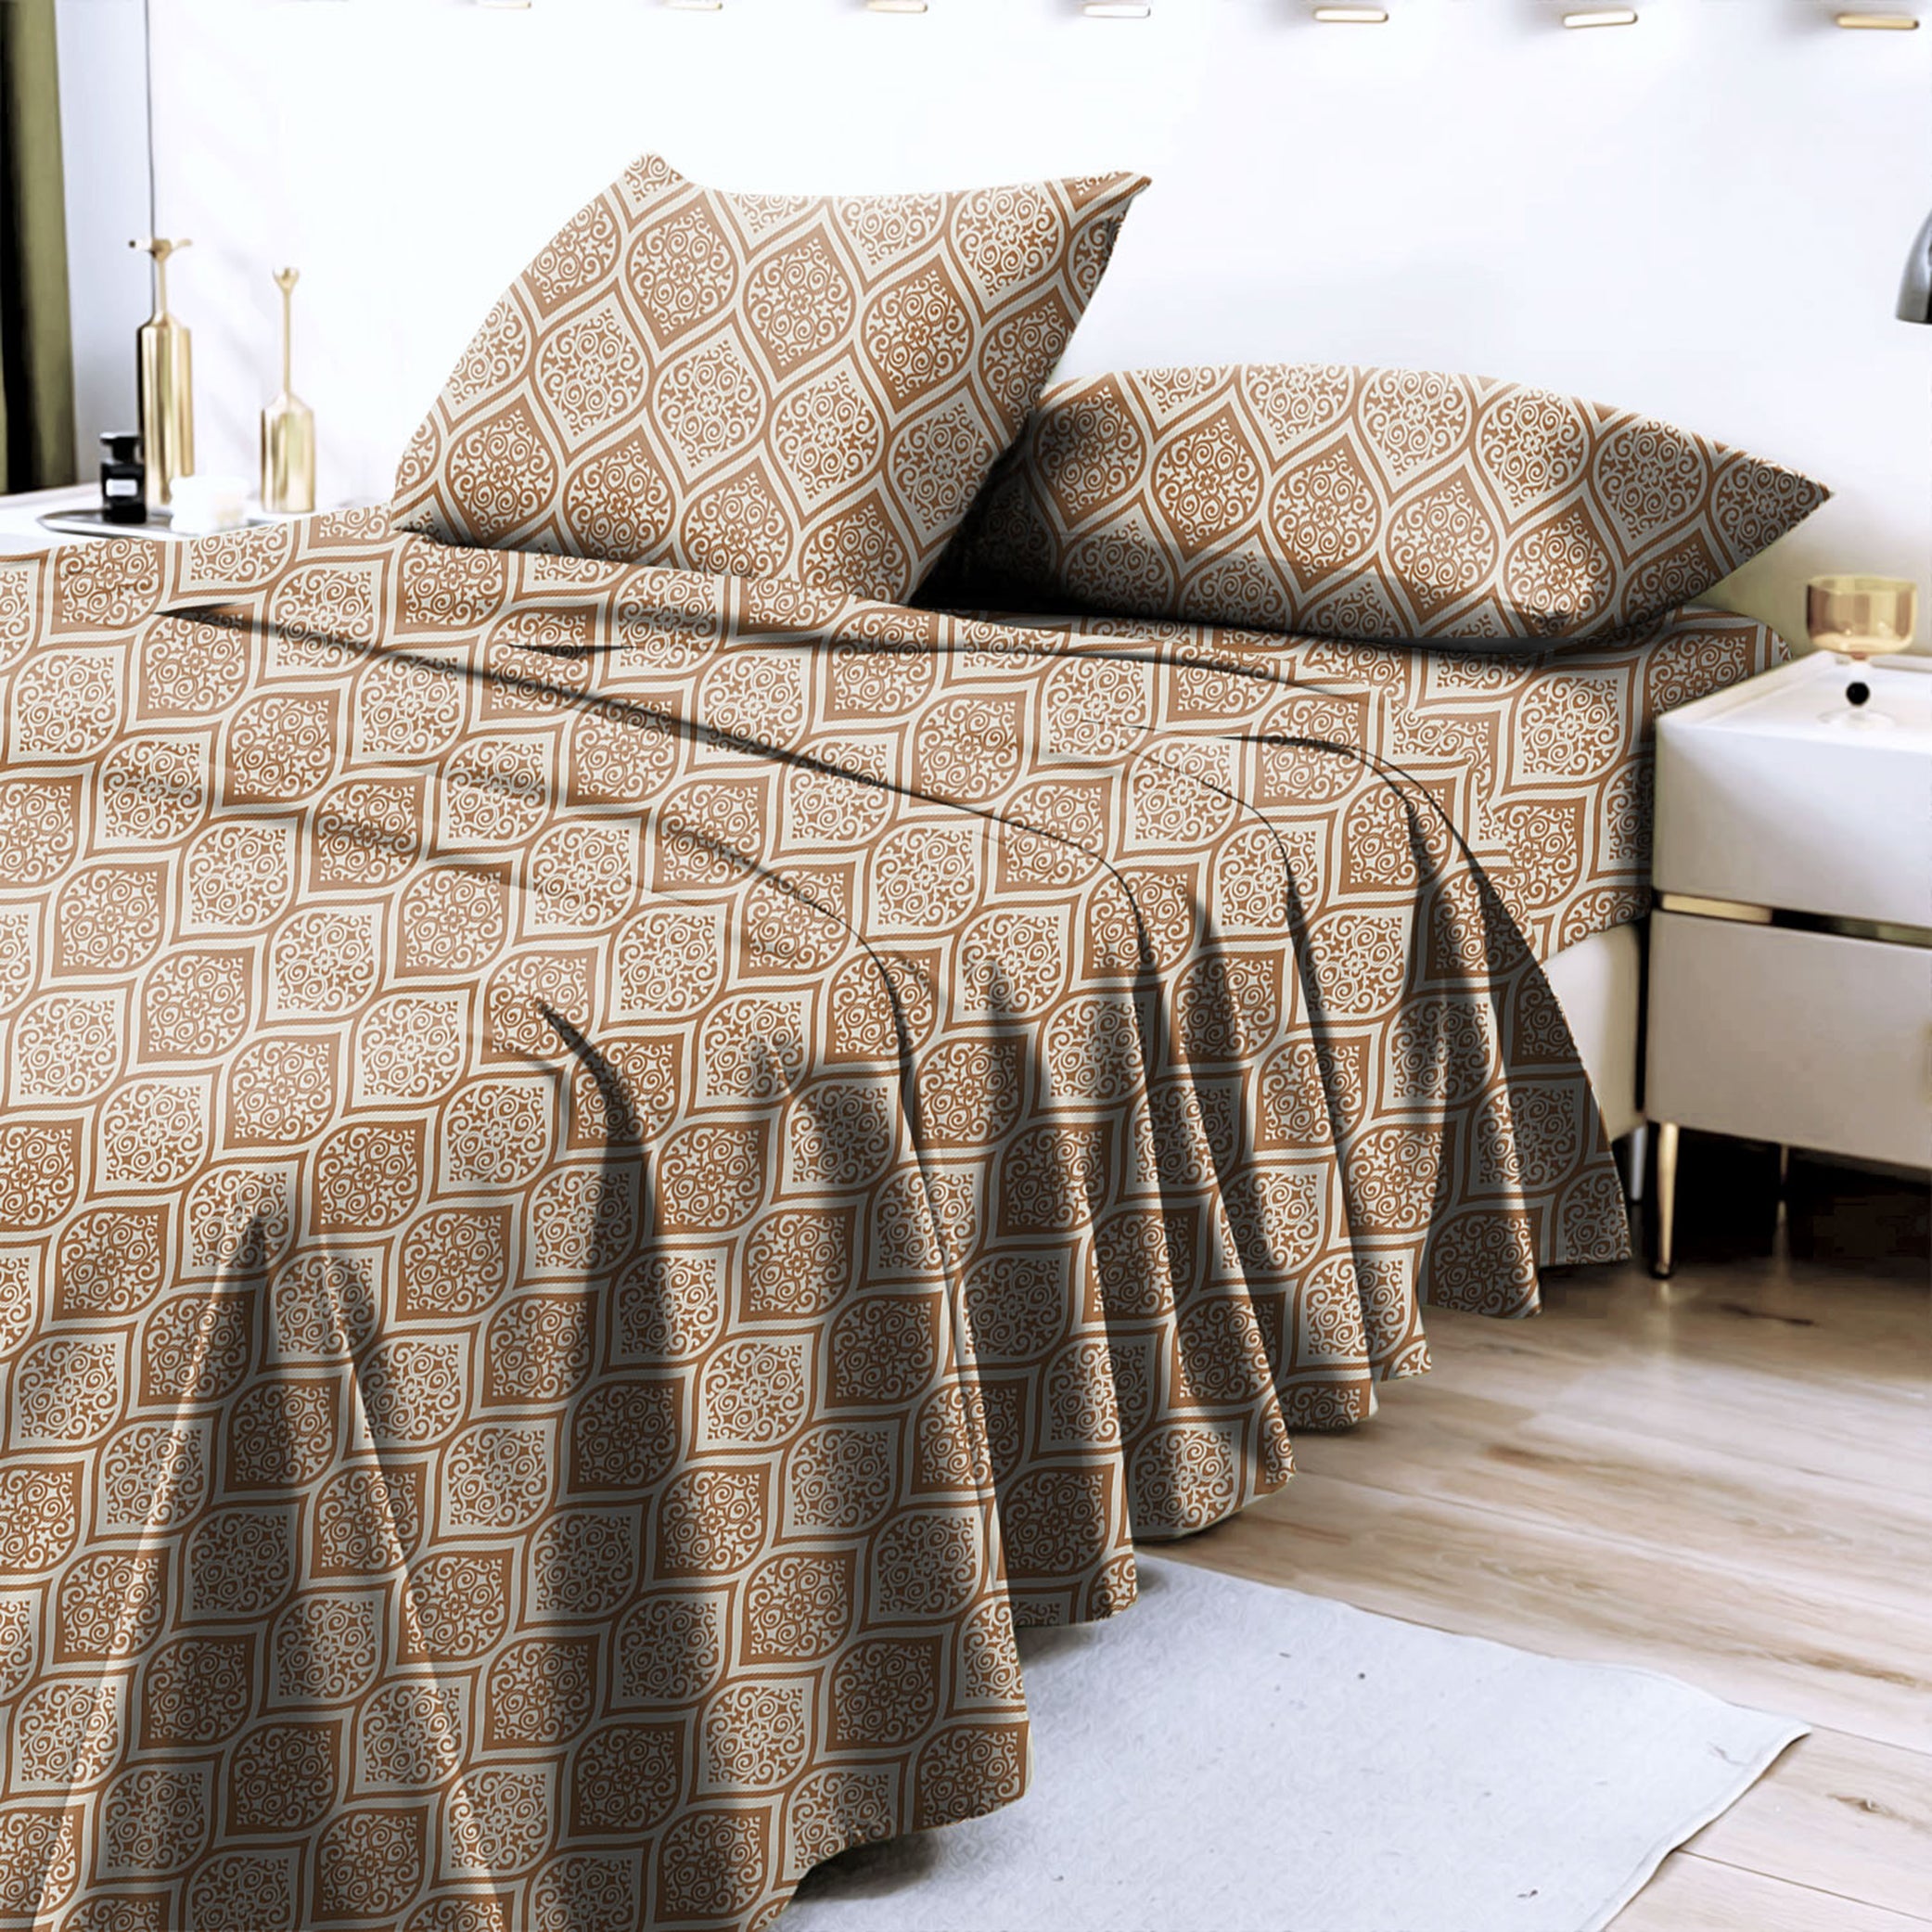 Manhattan Brownish Bedcover for Double Bed with 2 Pillow Covers King Size (104" X 90")